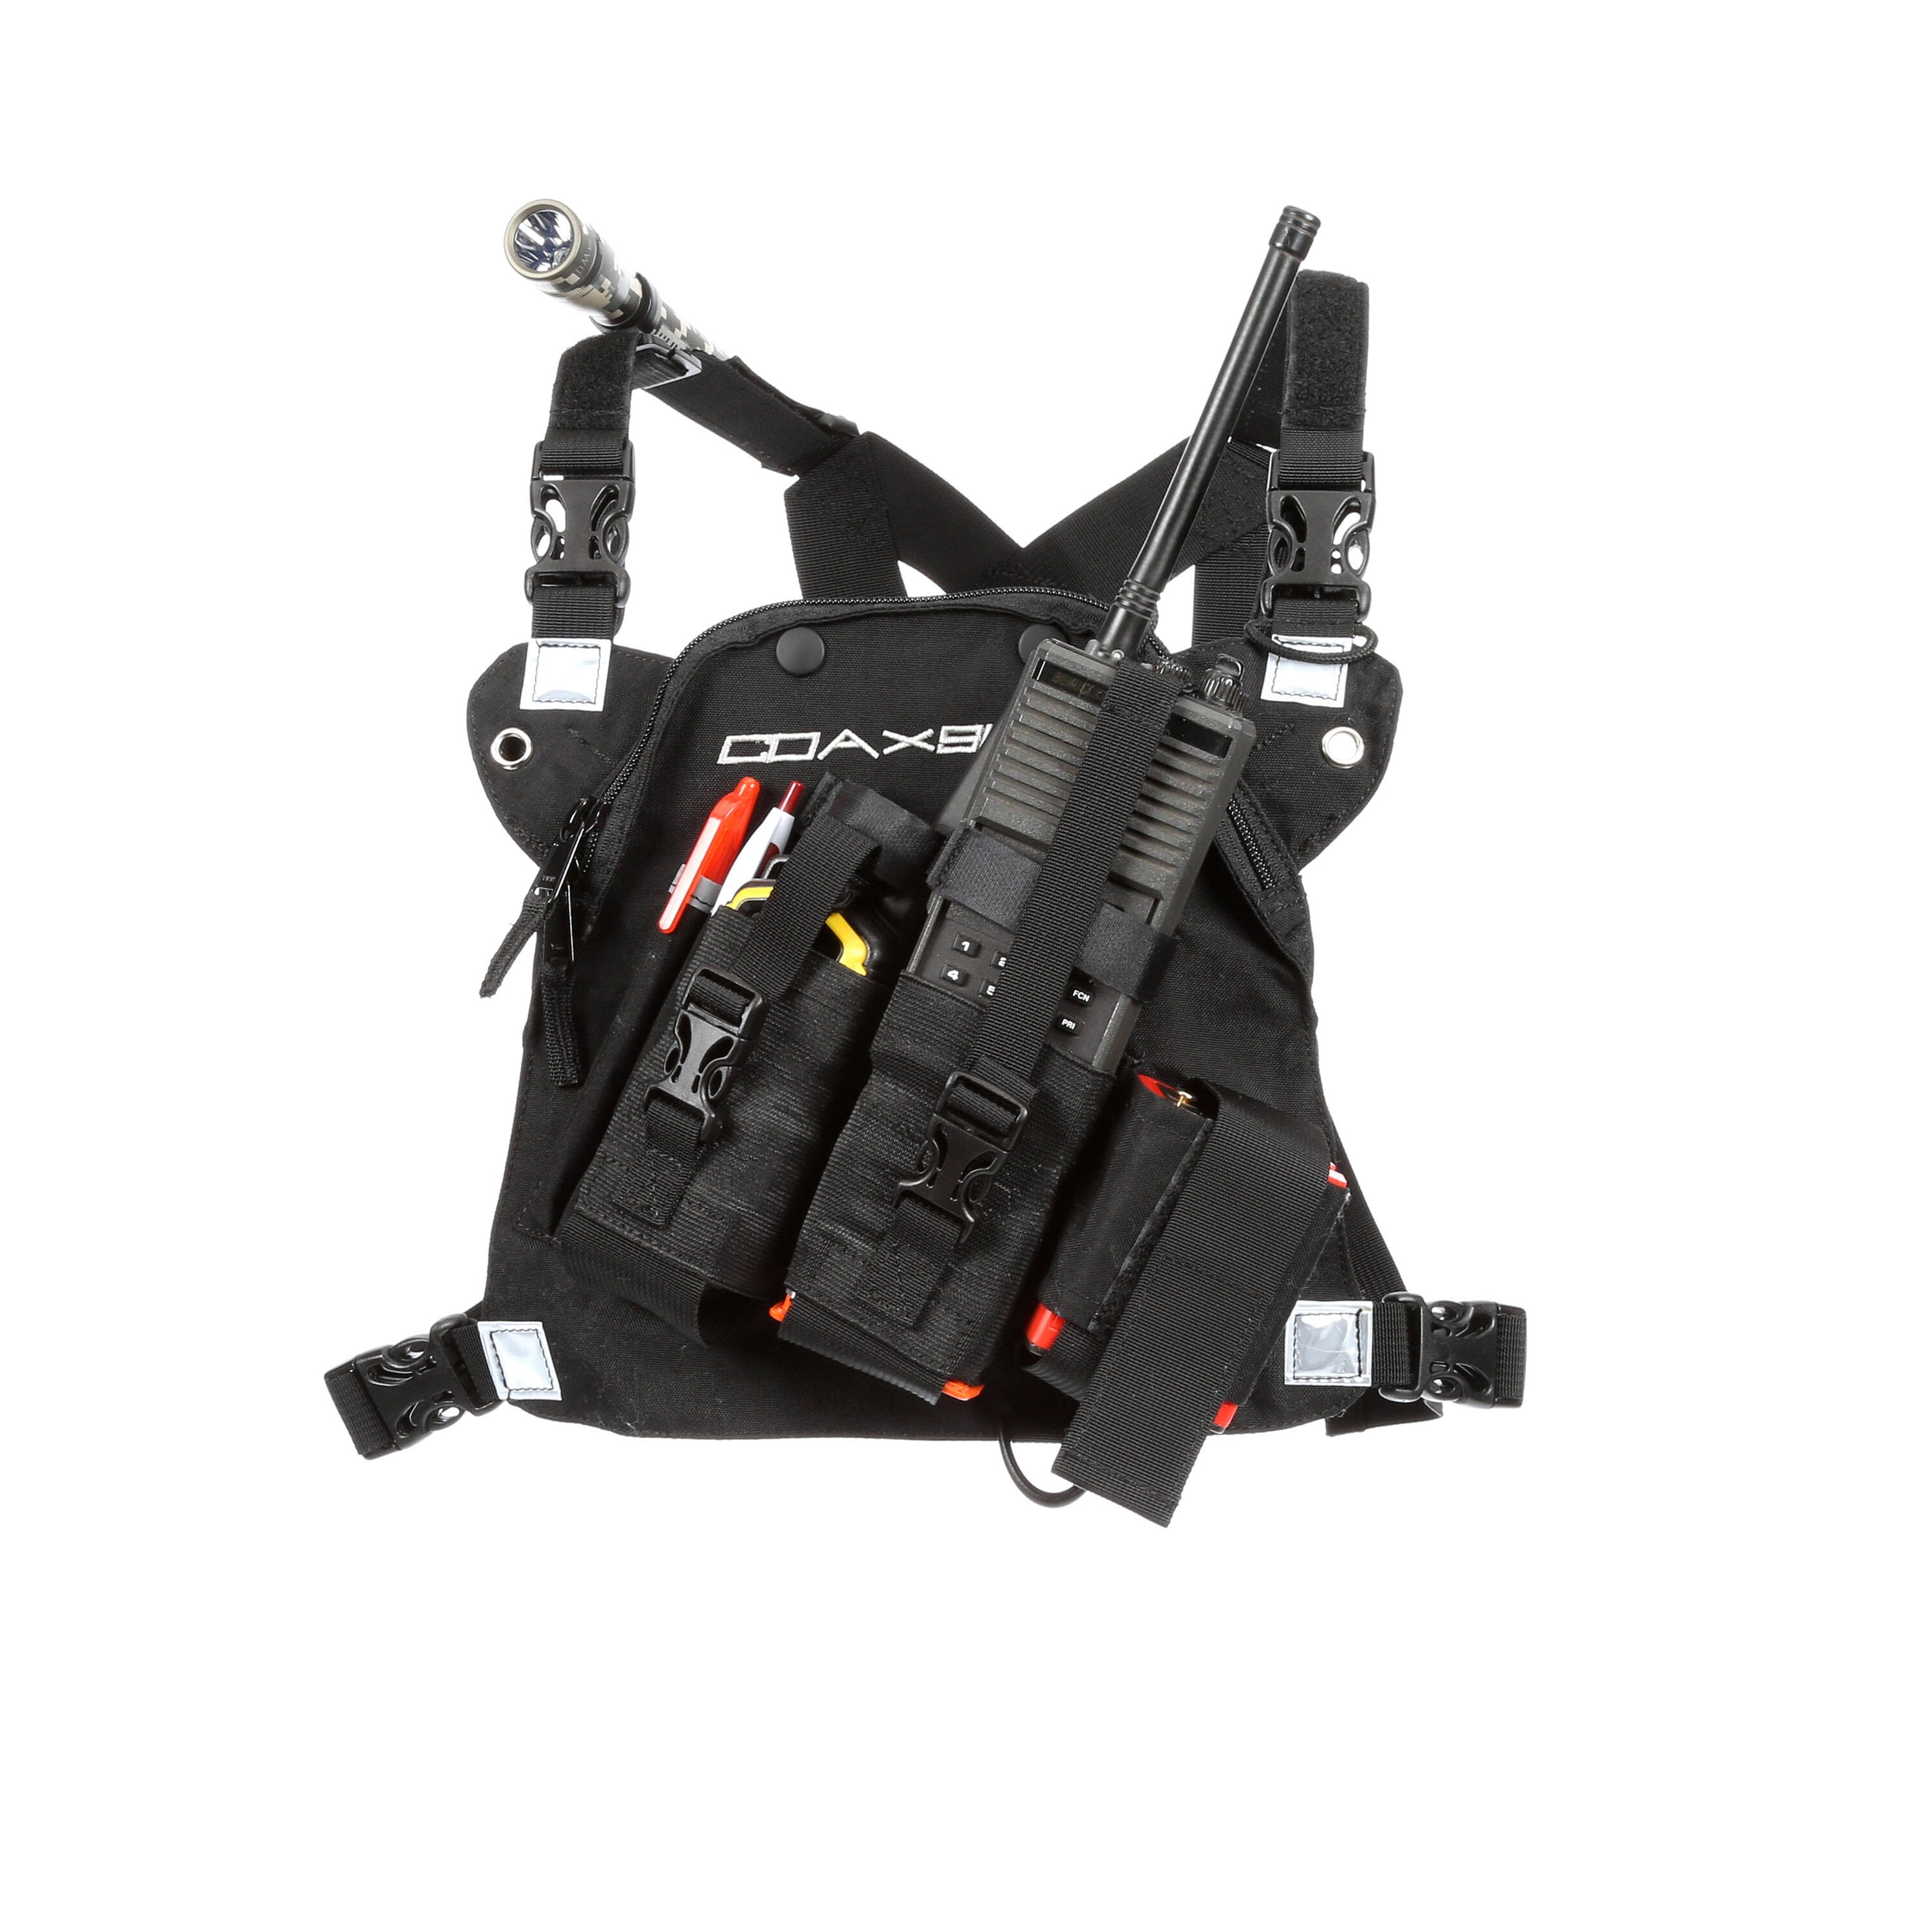 DR-1 Commander dual radio chest harness